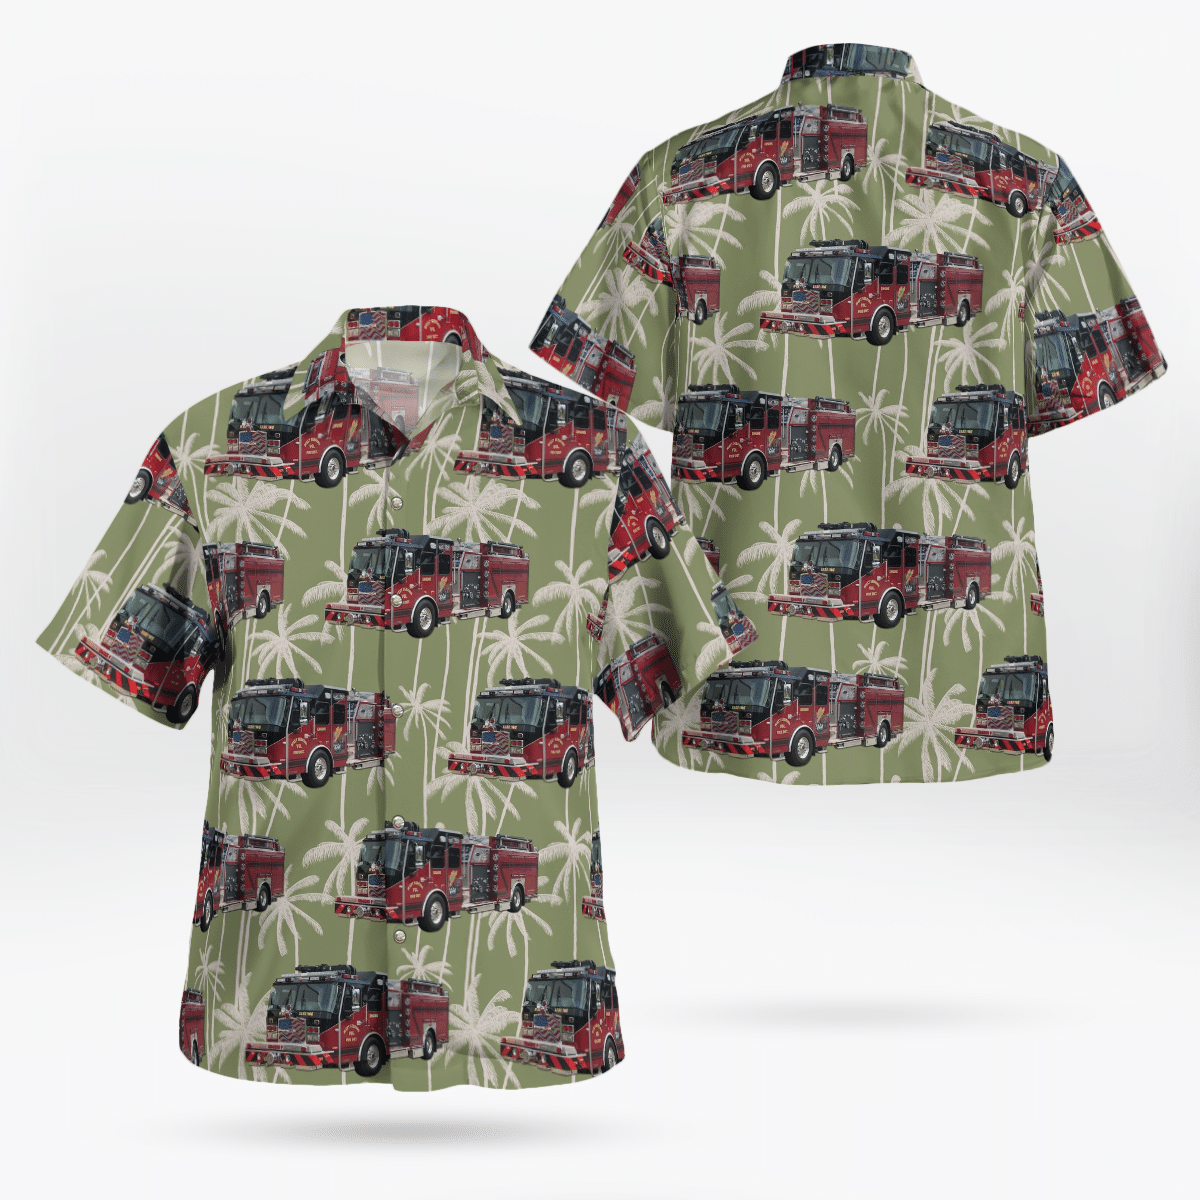 If you are in need of a new summertime look, pick up this Hawaiian shirt 164